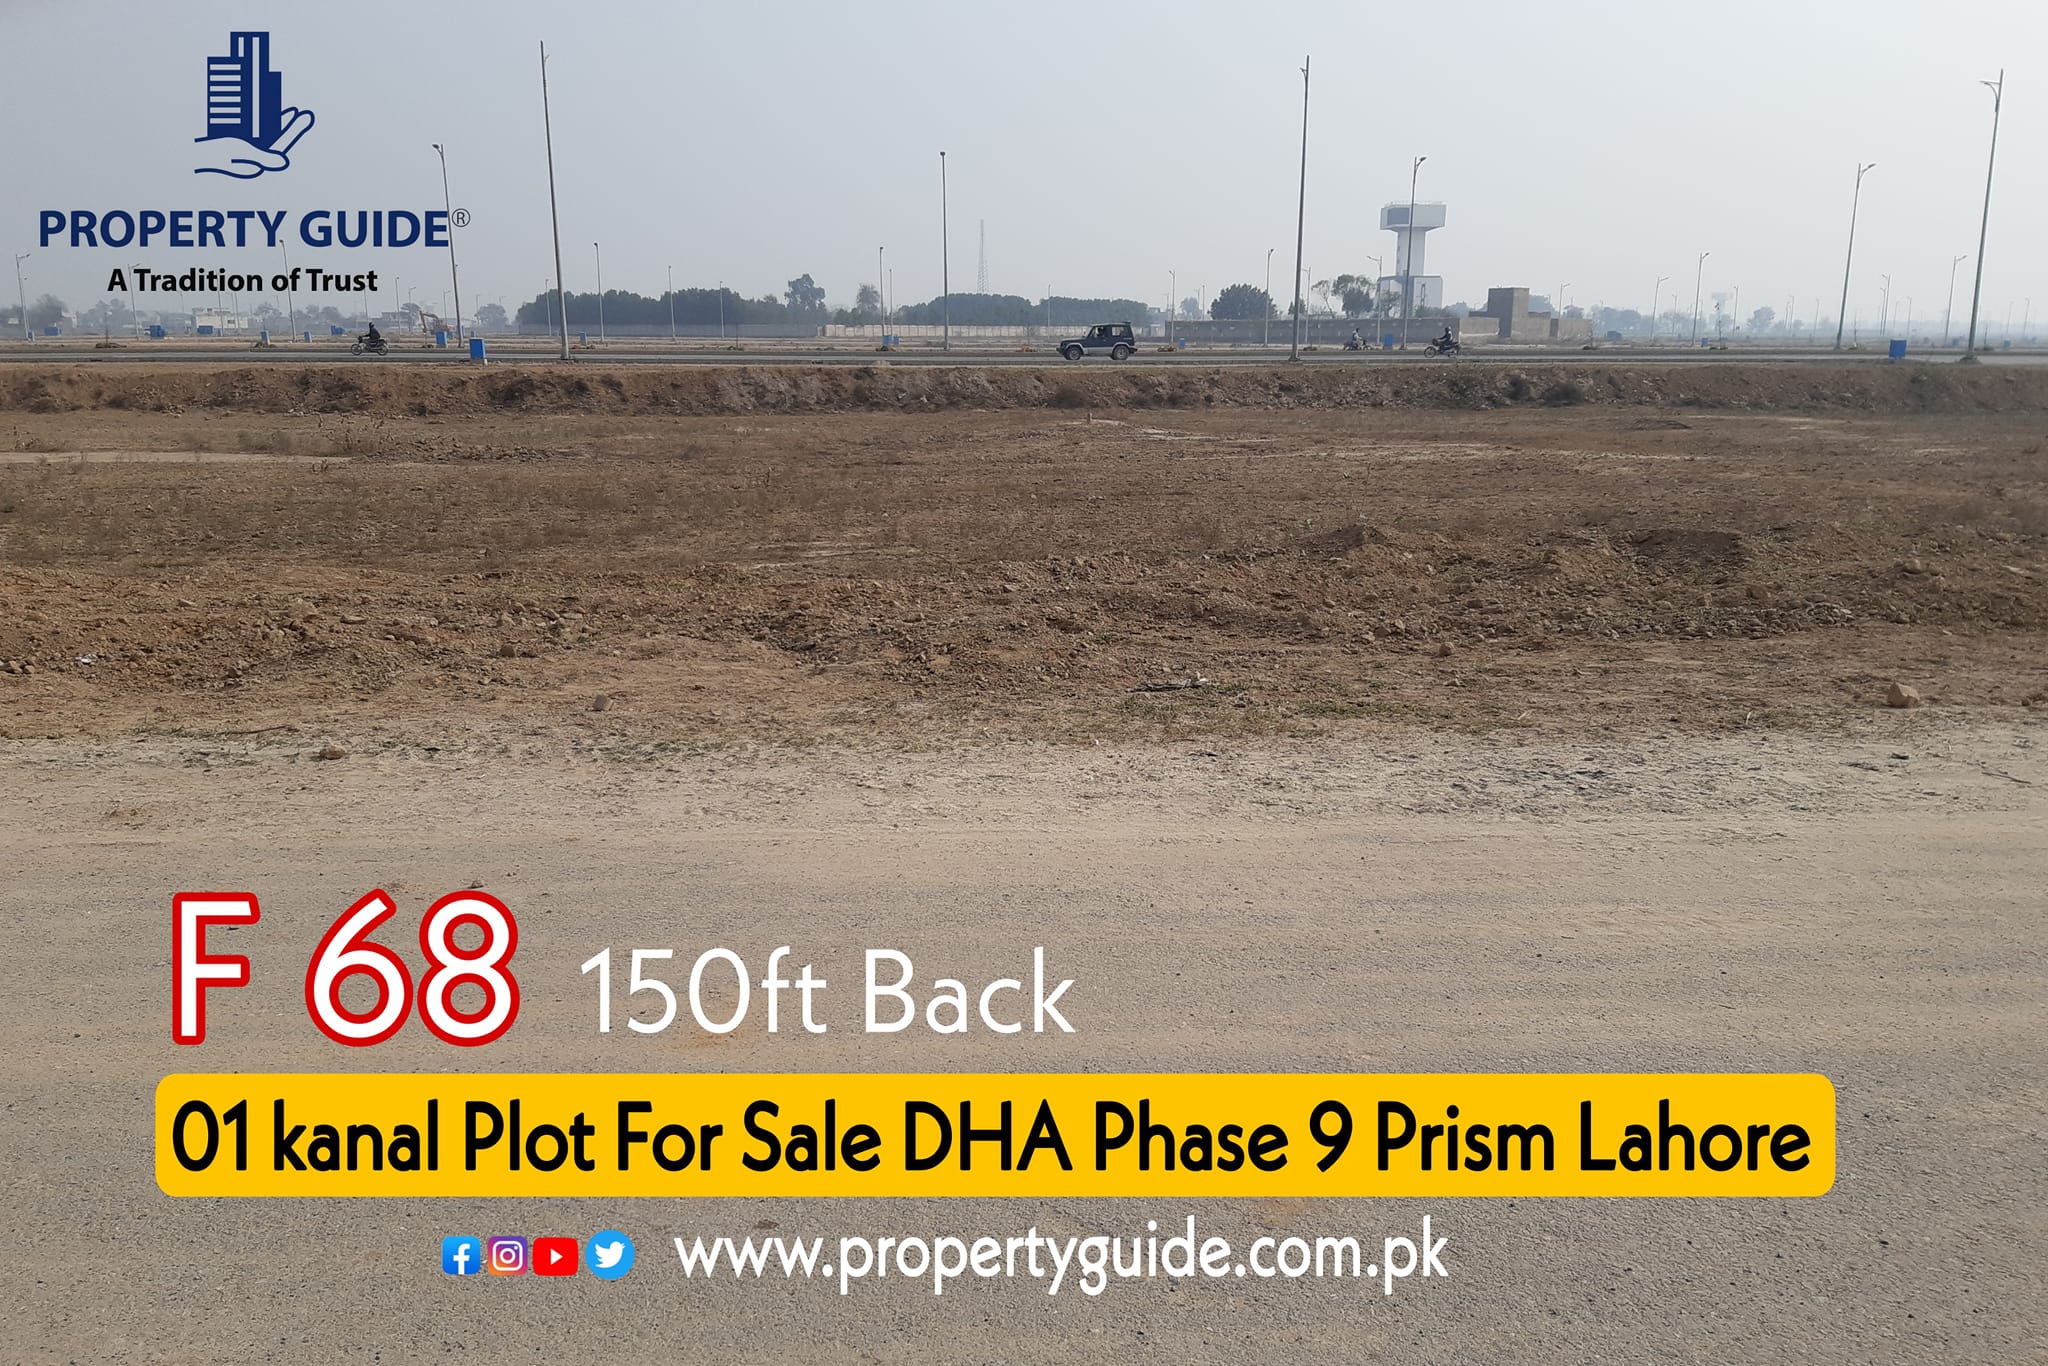 DHA Phase 9 Prism Lahore Plot For Sale